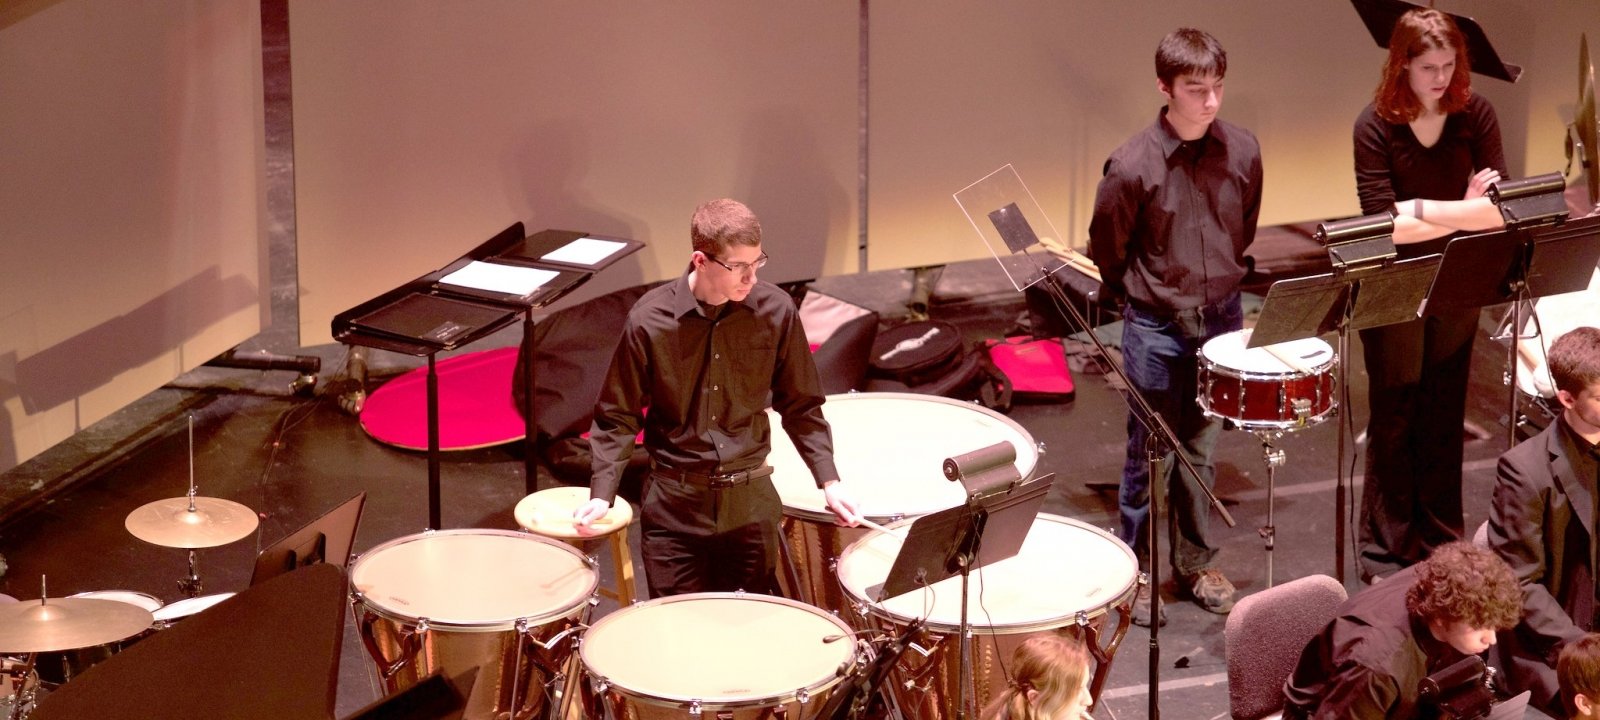 Student performing with the Keweenaw Symphony Orchestra playing large drums.